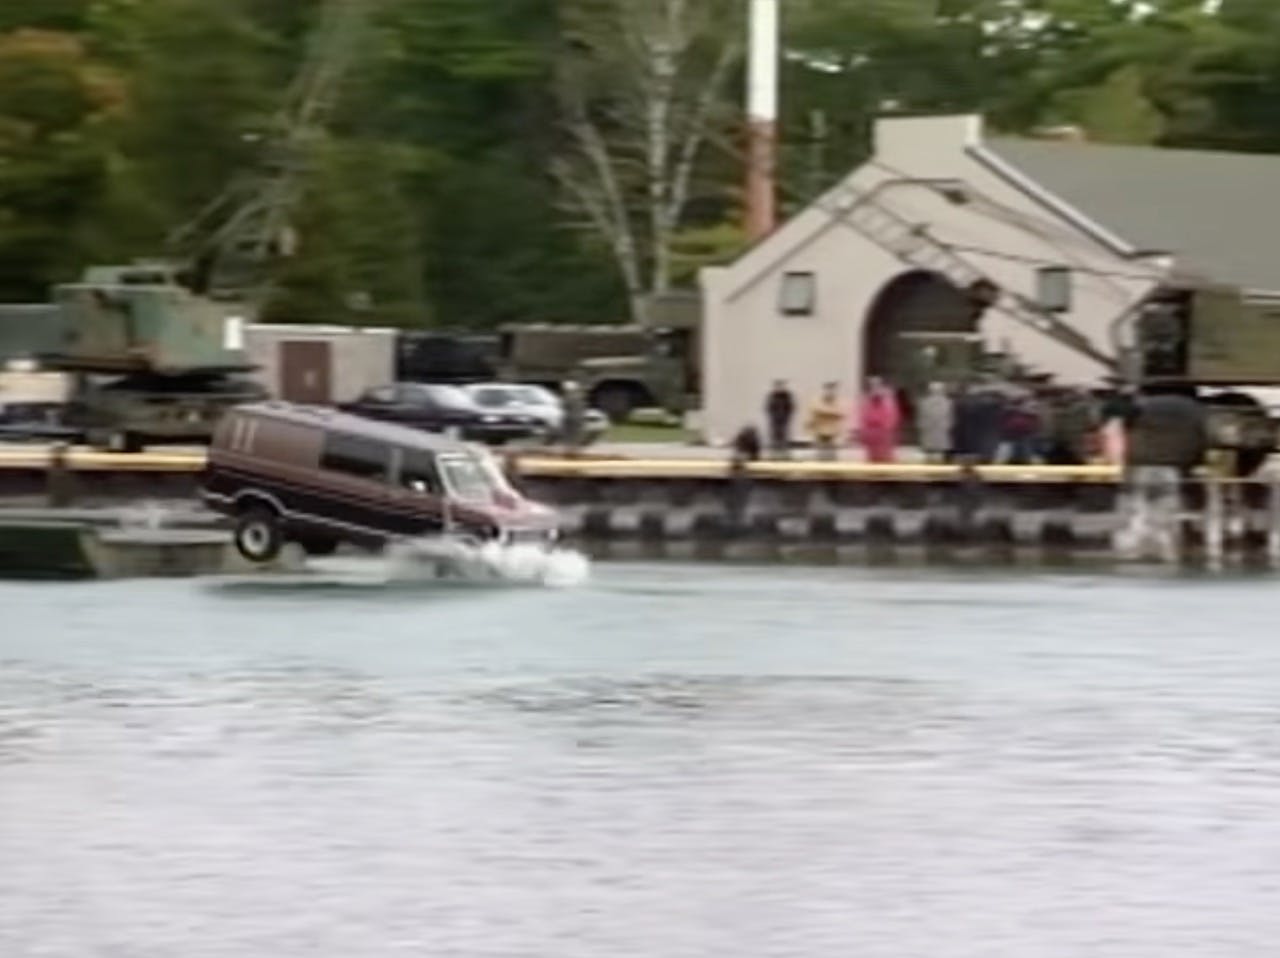 Accident reconstructionists drive a Ford van into a lake